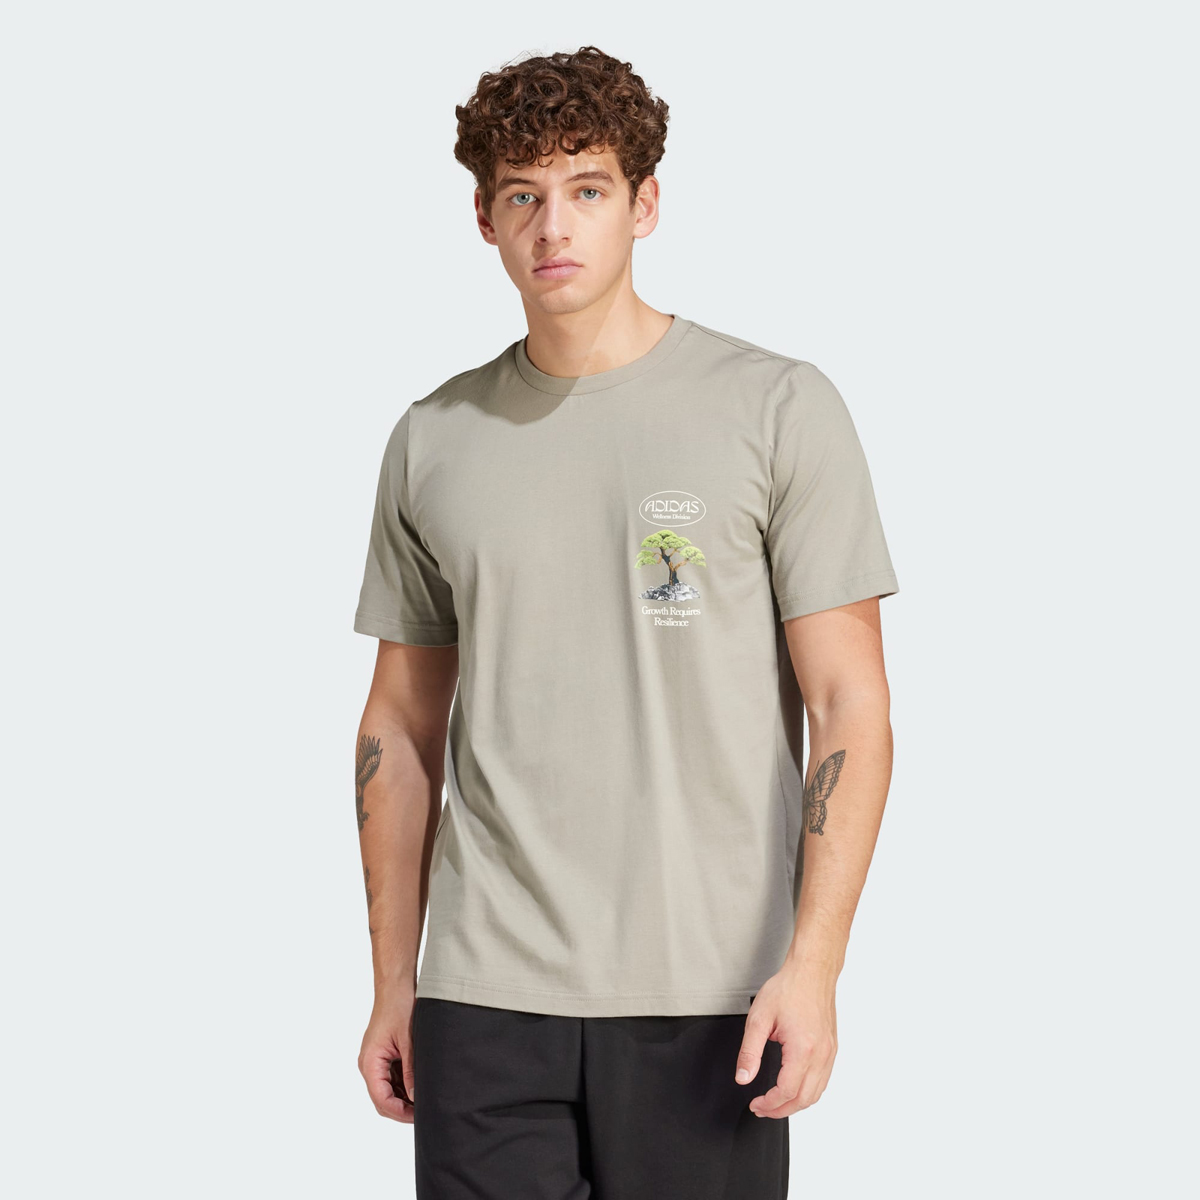 adidas-Growth-Graphic-T-Shirt-Silver-Pebble-1